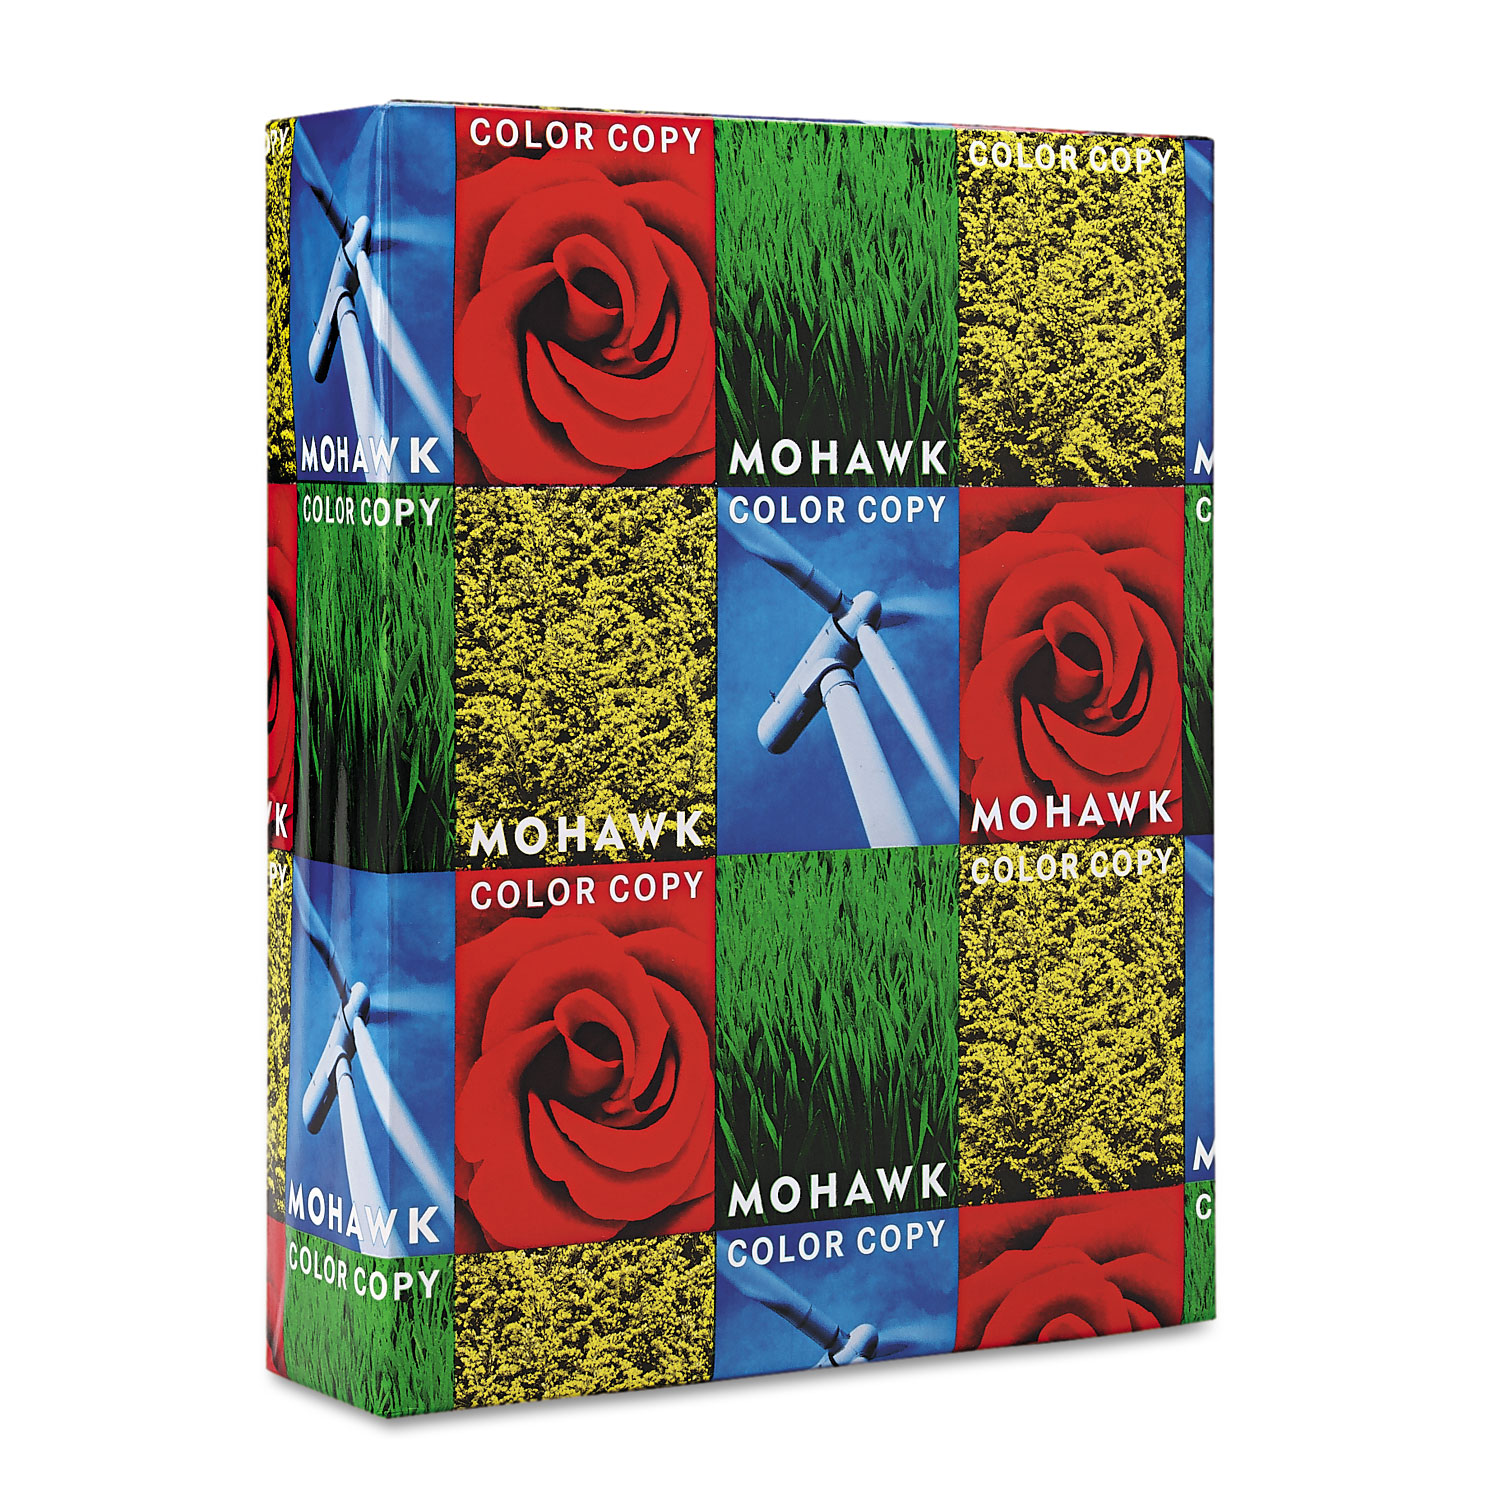  Mohawk 54-301 Color Copy Recycled Paper, 94 Bright, 28lb, 8.5 x 11, PC White, 500/Ream (MOW54301) 